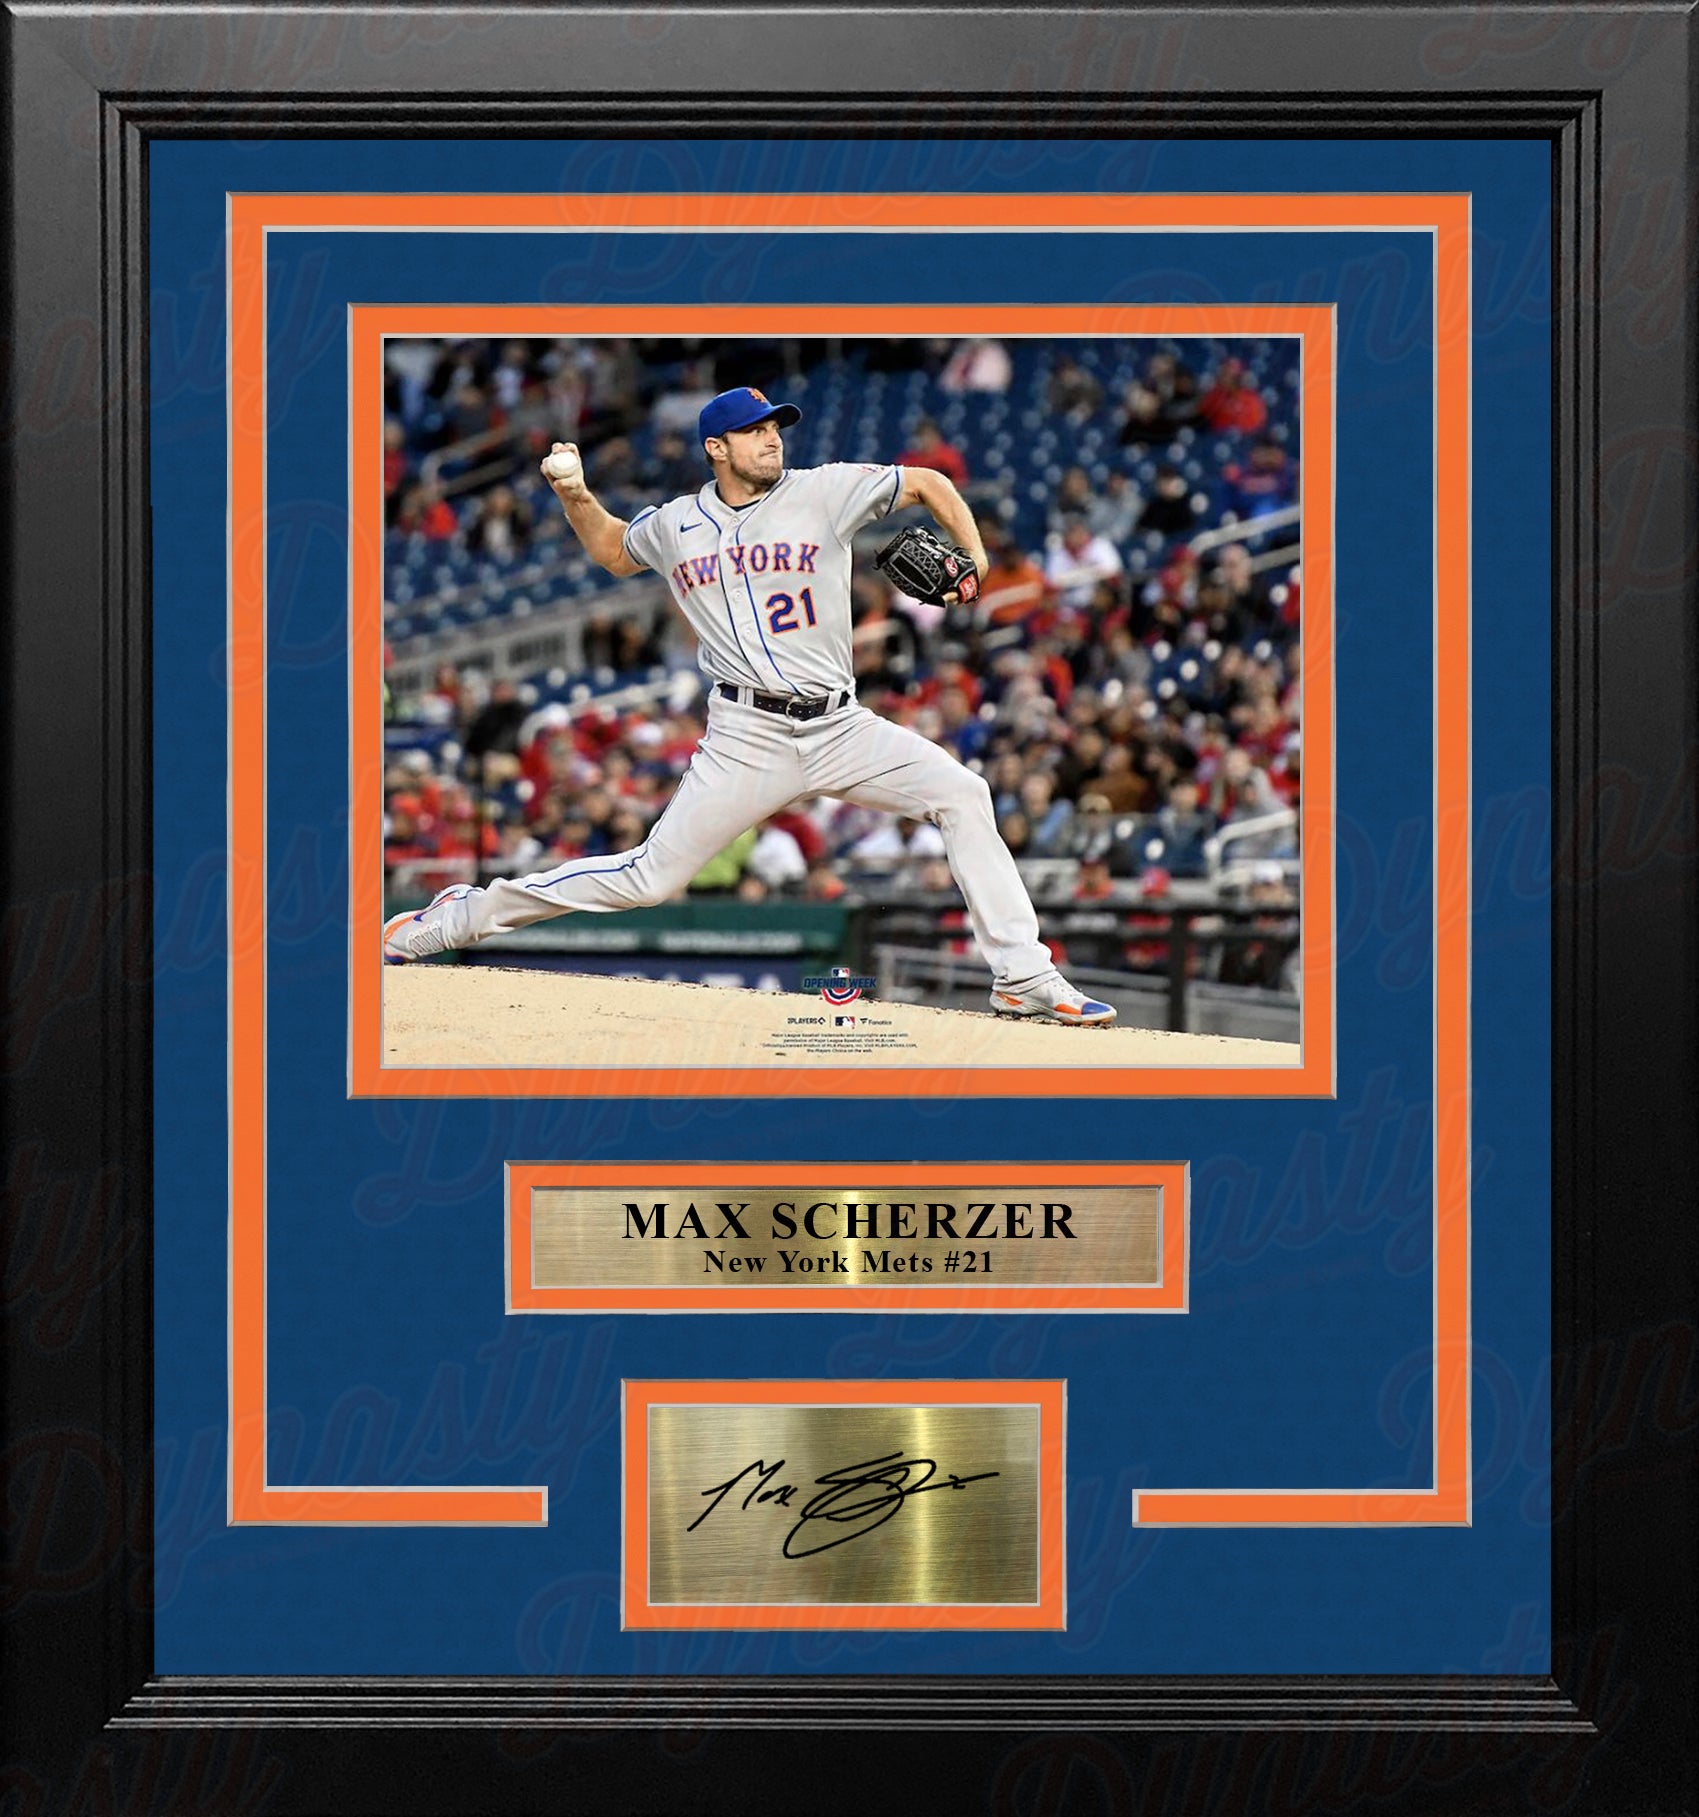 Max Scherzer in Action New York Mets 8" x 10" Framed Baseball Photo with Engraved Autograph - Dynasty Sports & Framing 